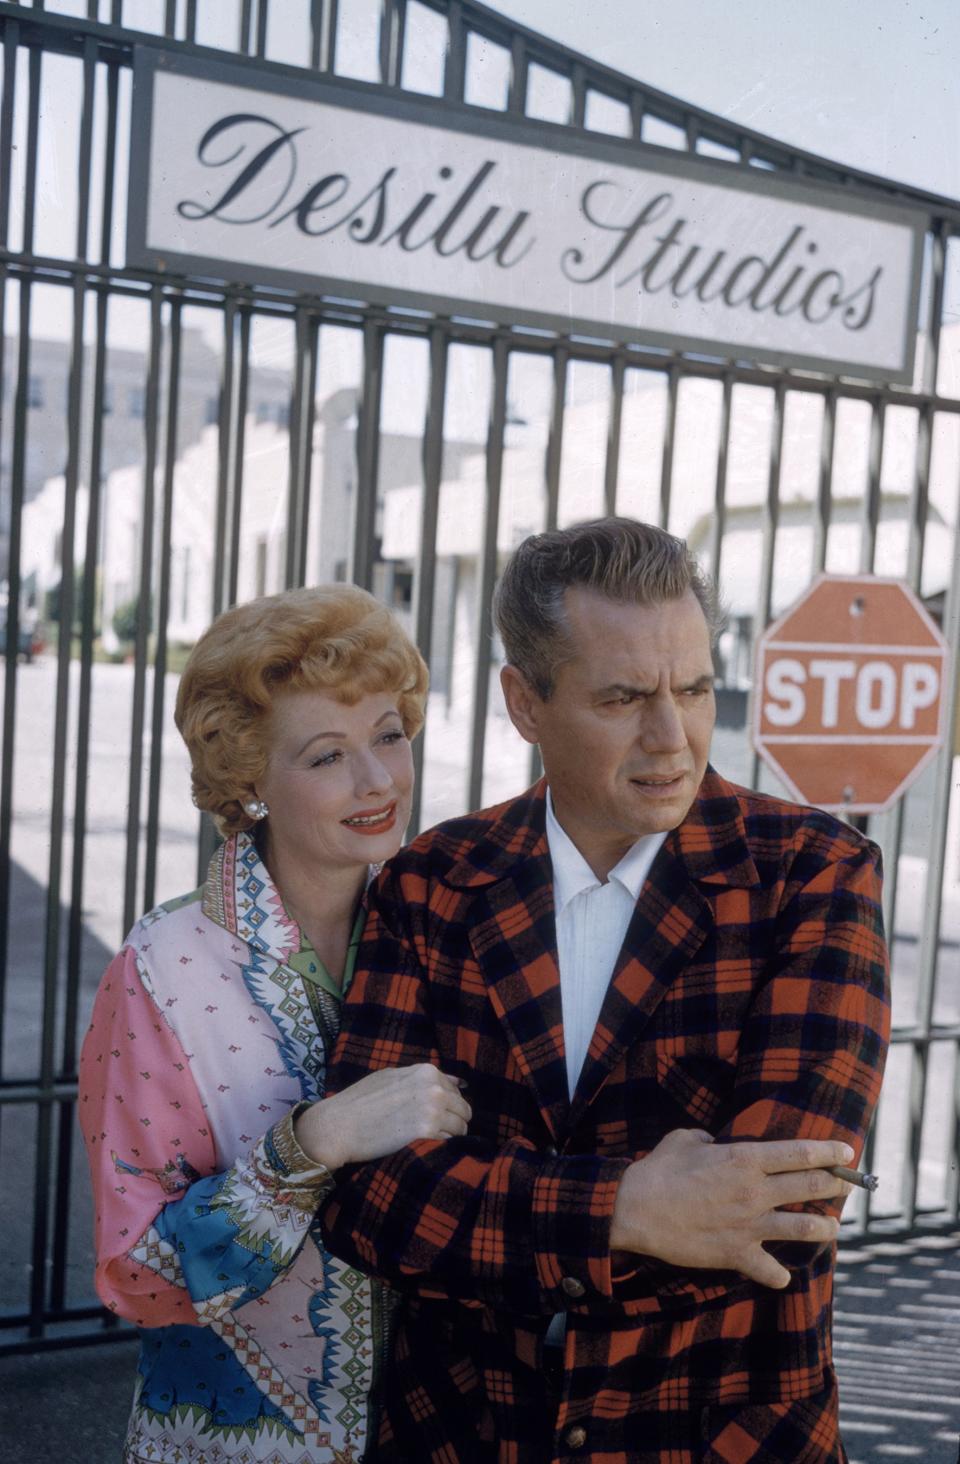 Ball and Arnaz pose next to the gates of their Desilu Studios in L.A. in August 1958.